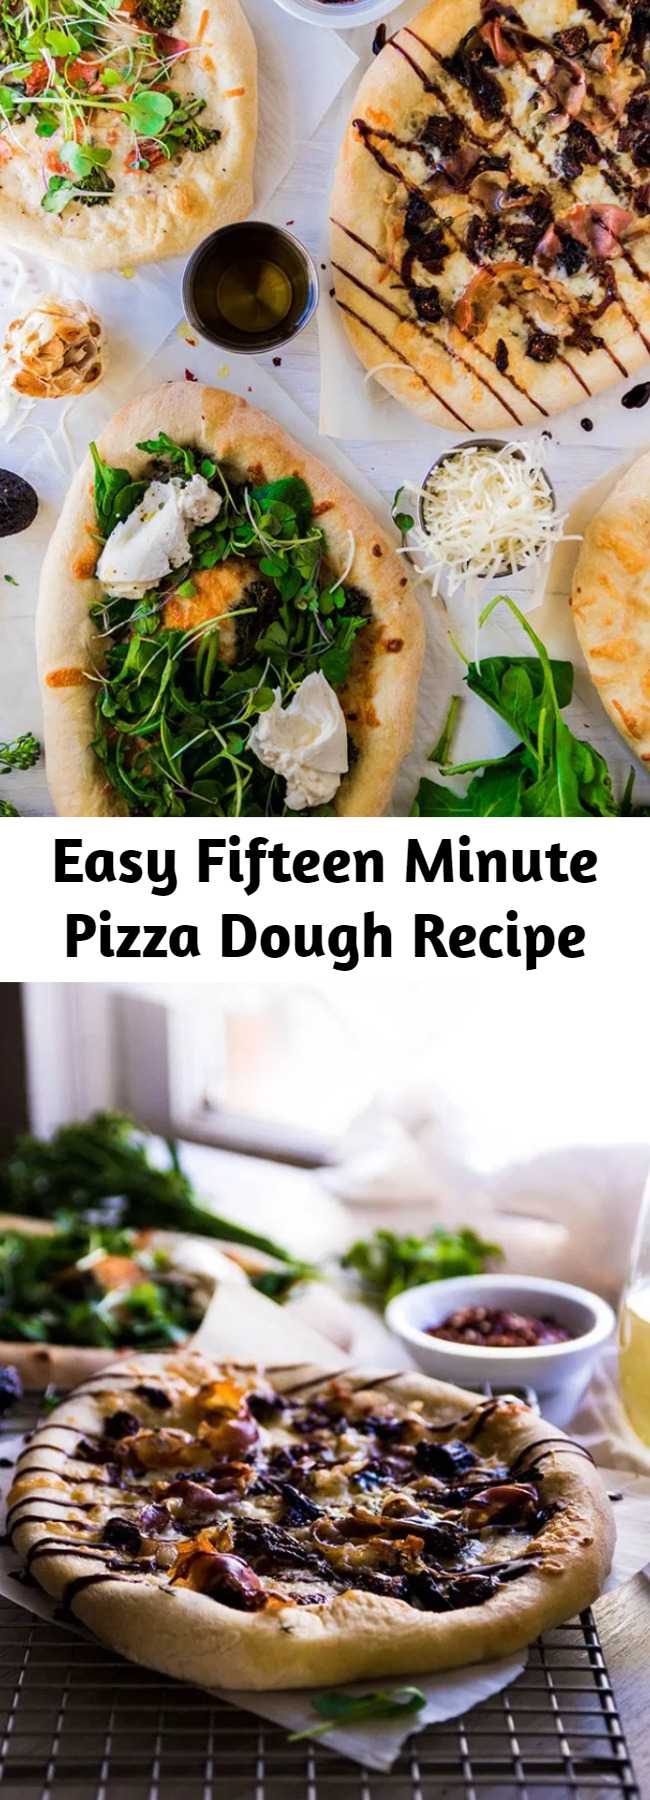 Easy Fifteen Minute Pizza Dough Recipe - This easy pizza dough recipe is weeknight-friendly and ready to bake in just fifteen minutes. The perfect quick pizza dough for busy evenings. Vegan, vegetarian.